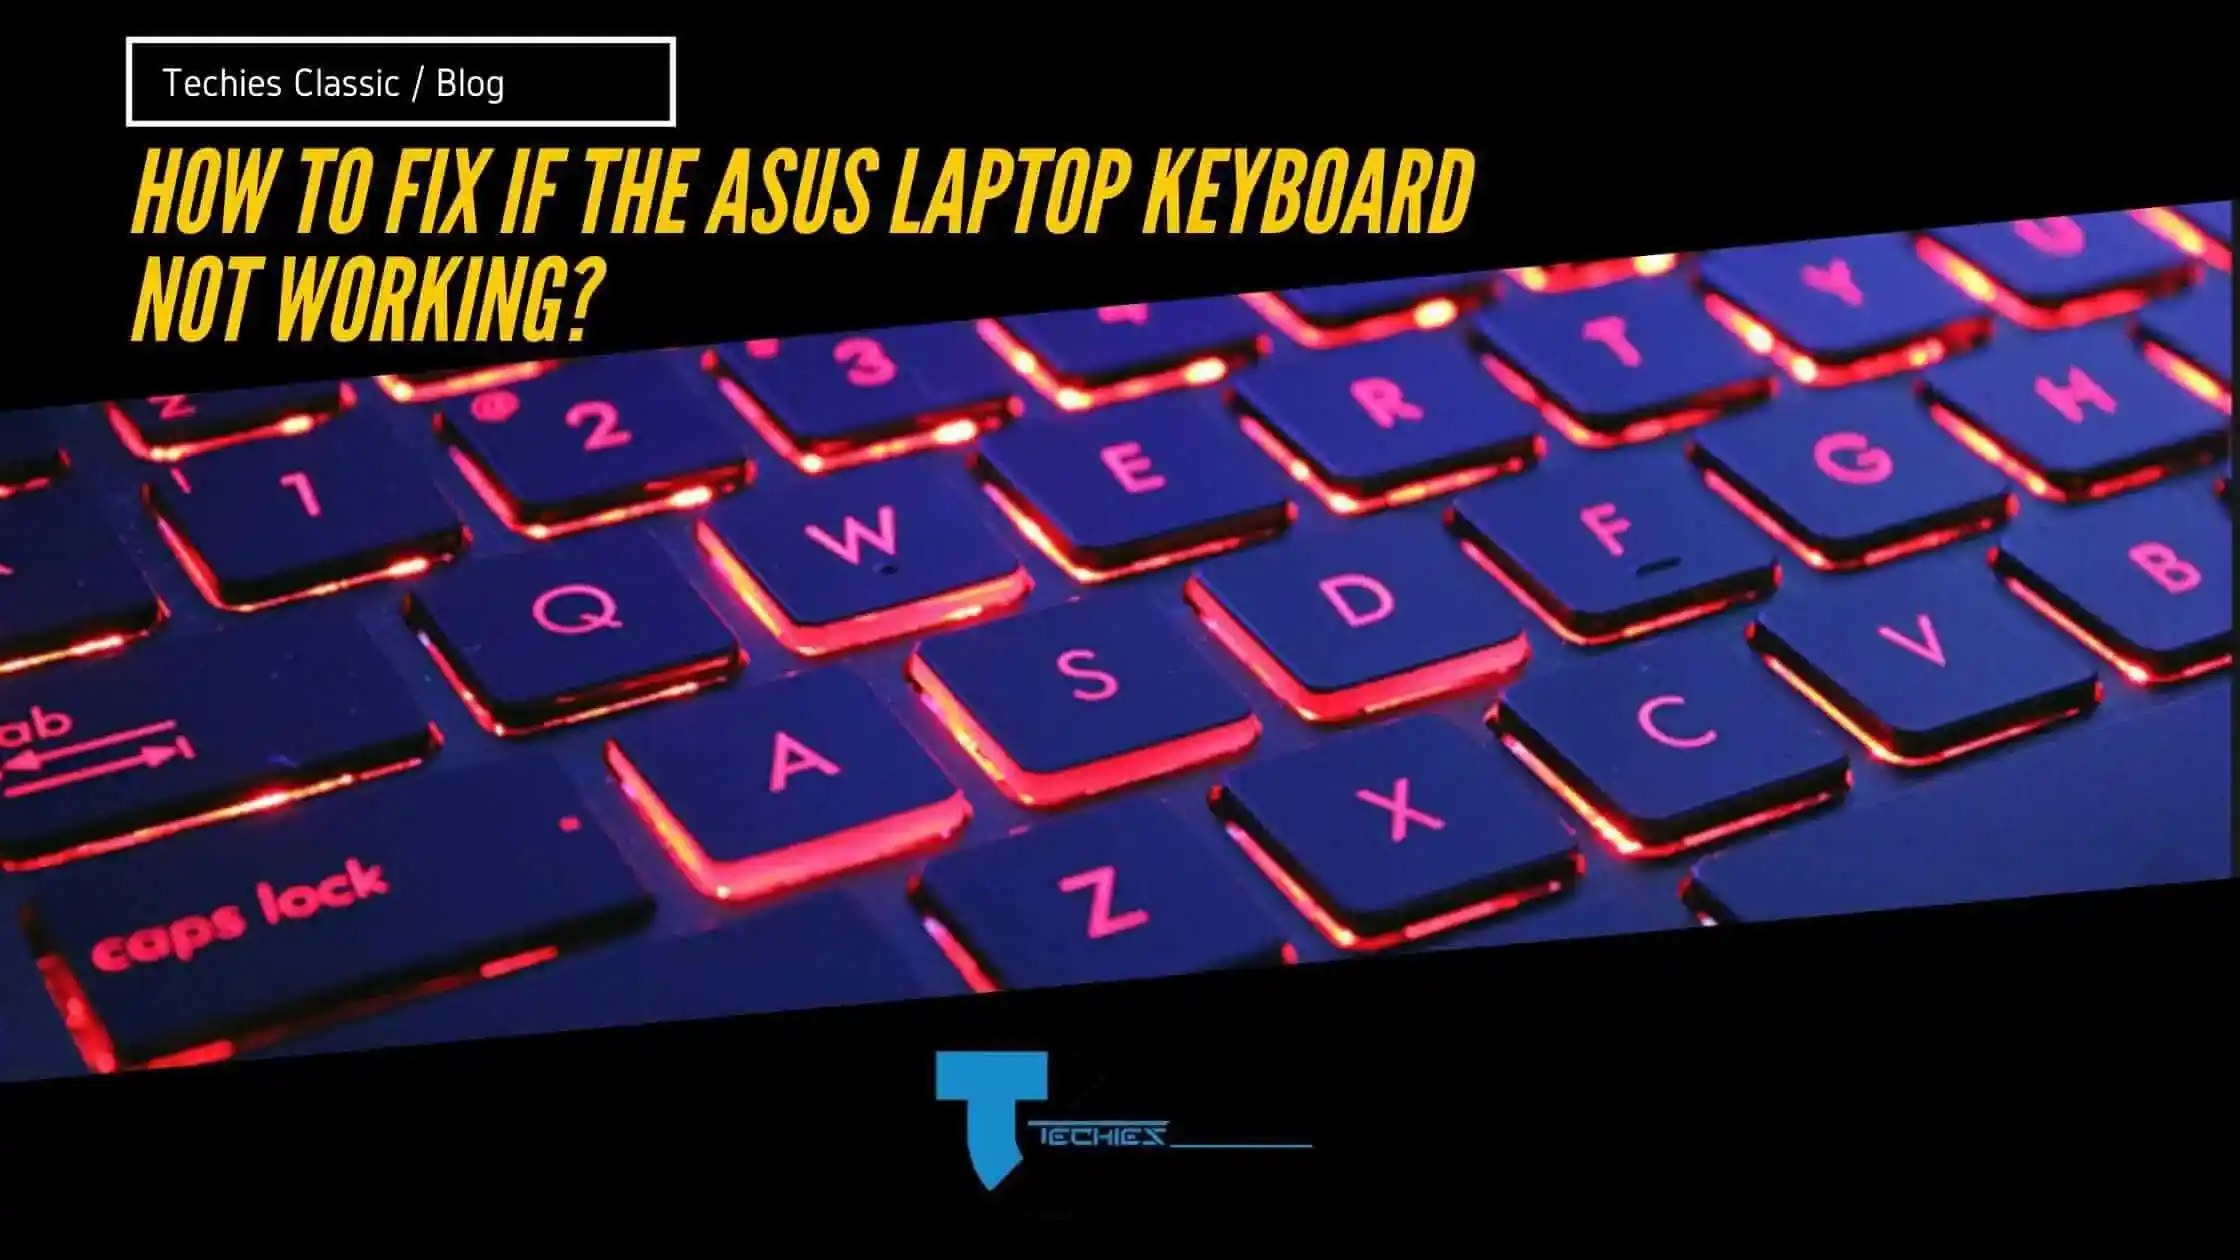 Techies Classic - How to if the laptop keyboard not working?